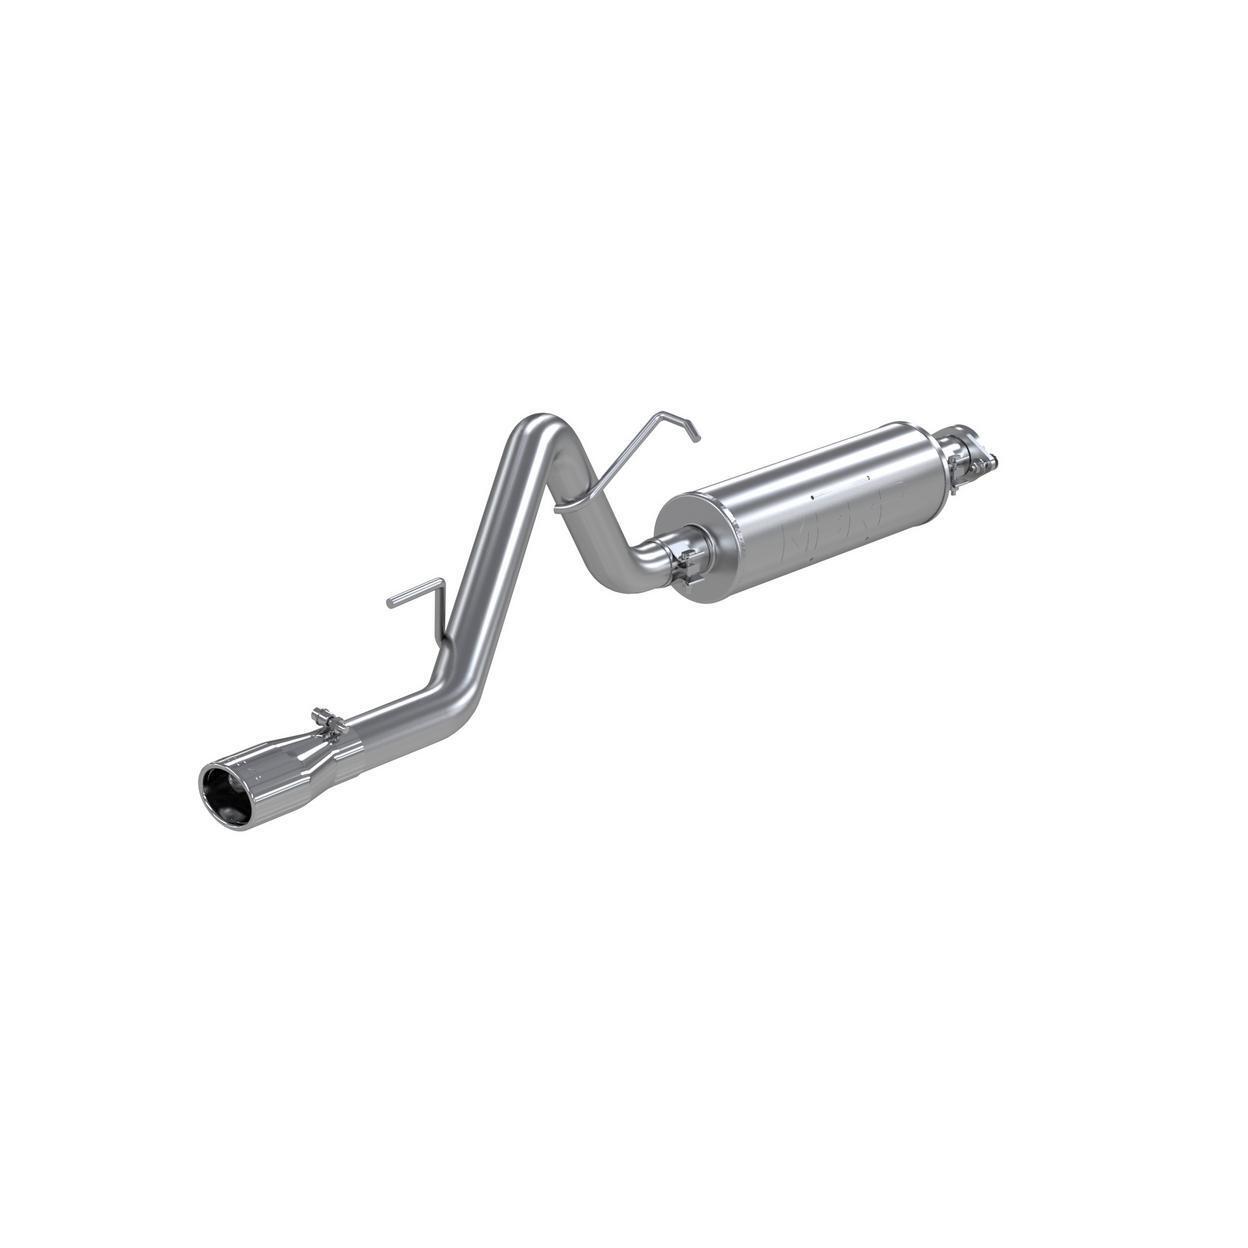 MBRP S5510AL-AX Exhaust System Kit Fits 2006 Jeep Liberty